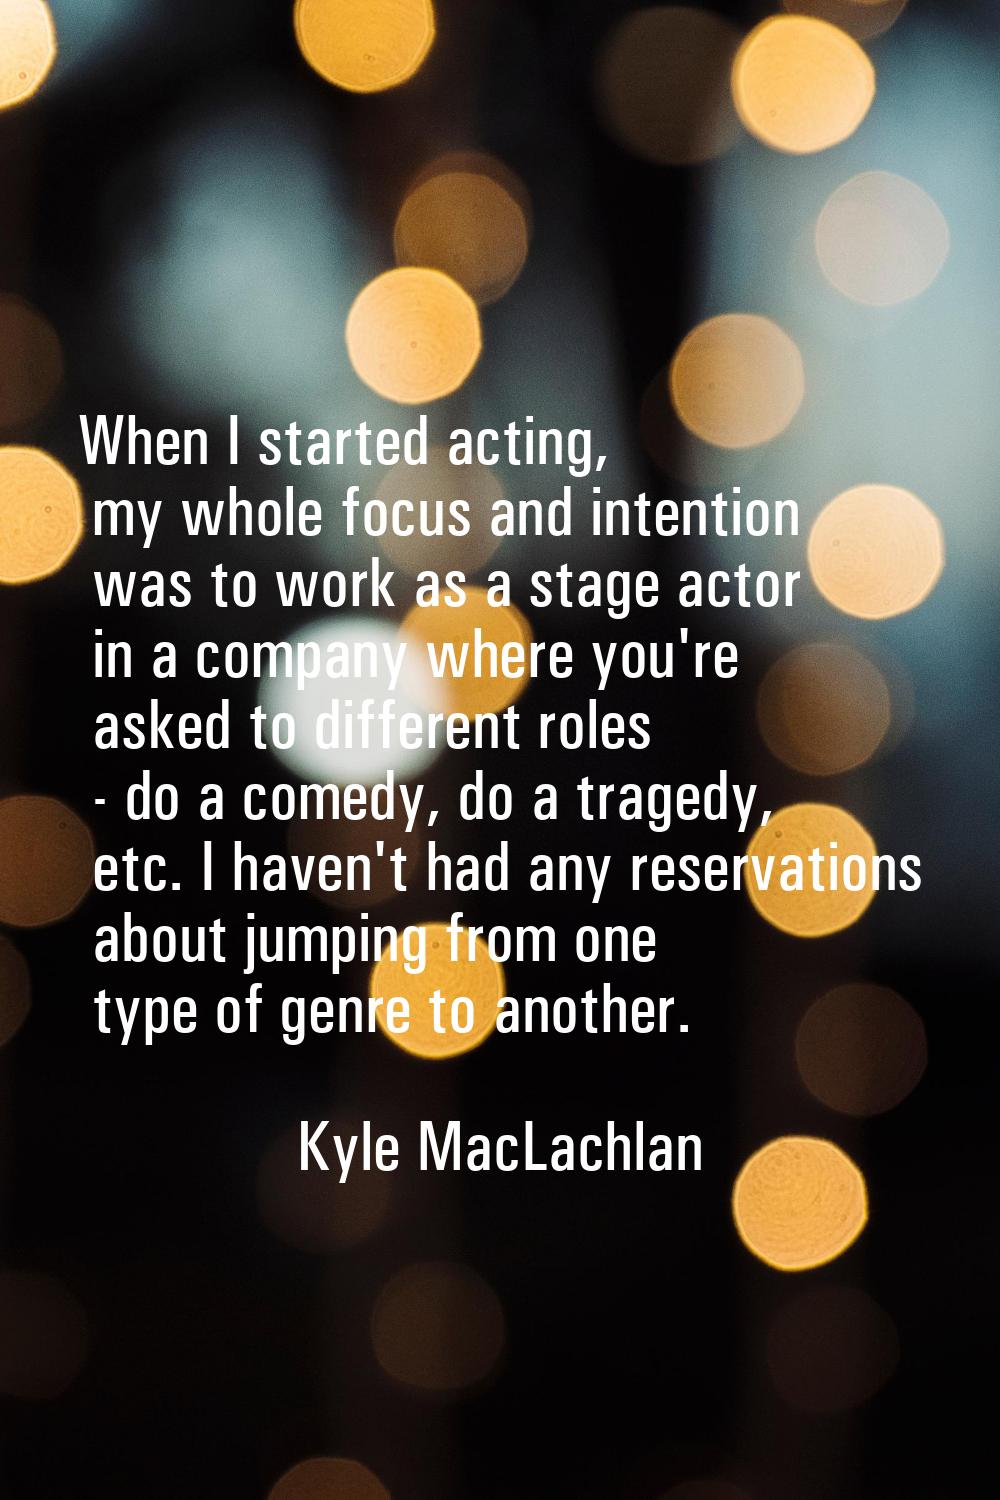 When I started acting, my whole focus and intention was to work as a stage actor in a company where